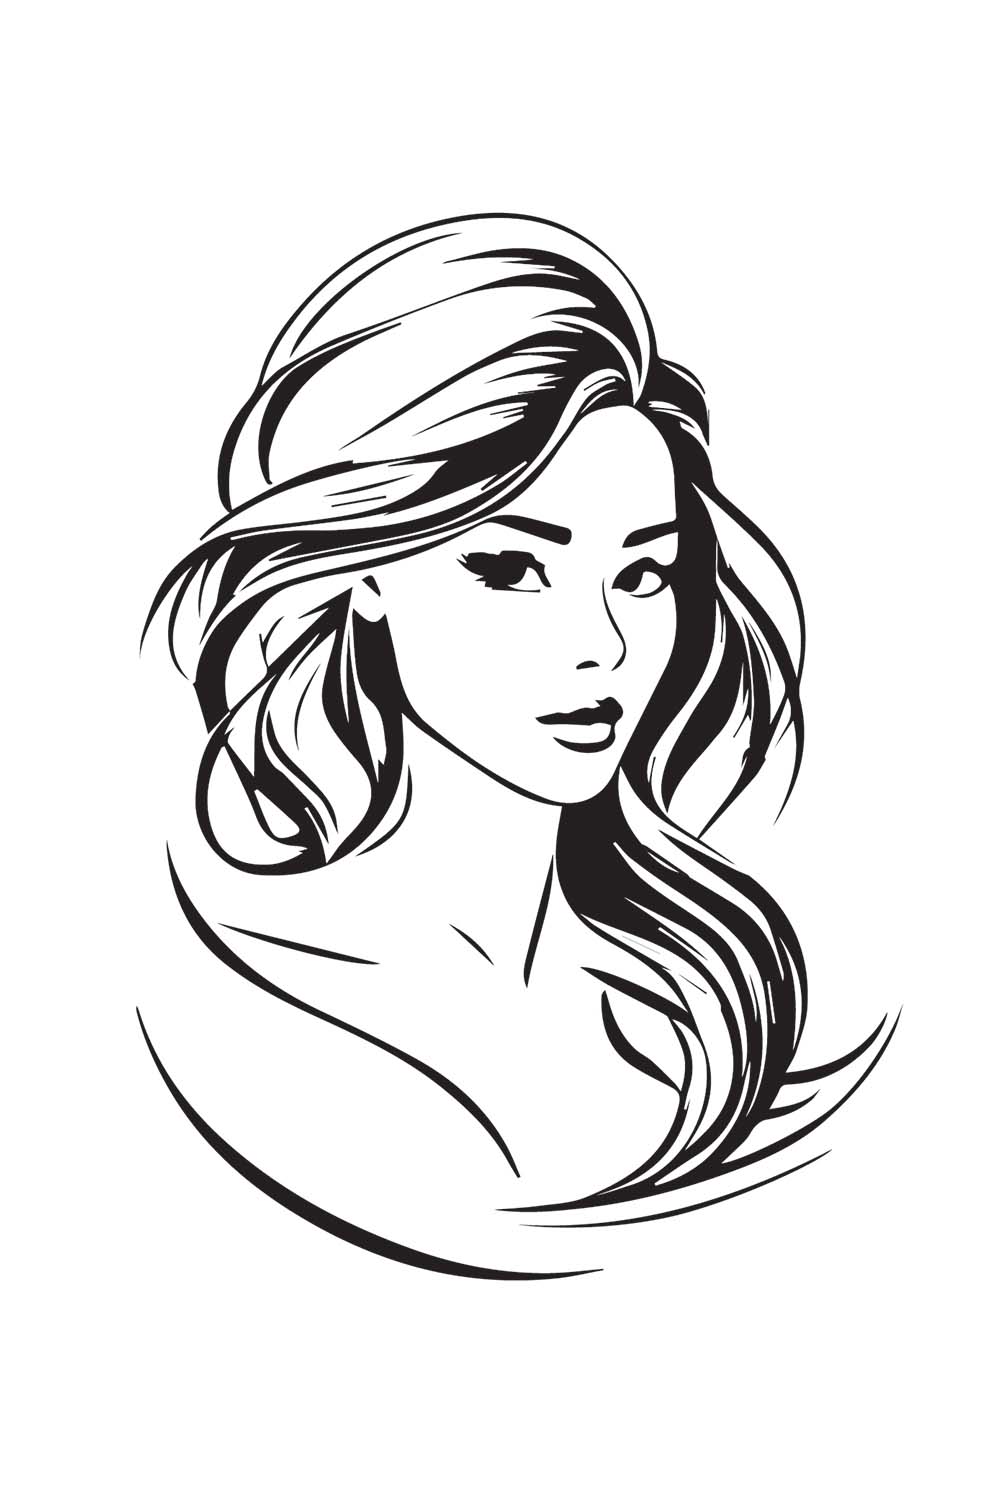 Beauty girl black and white logo pinterest preview image.